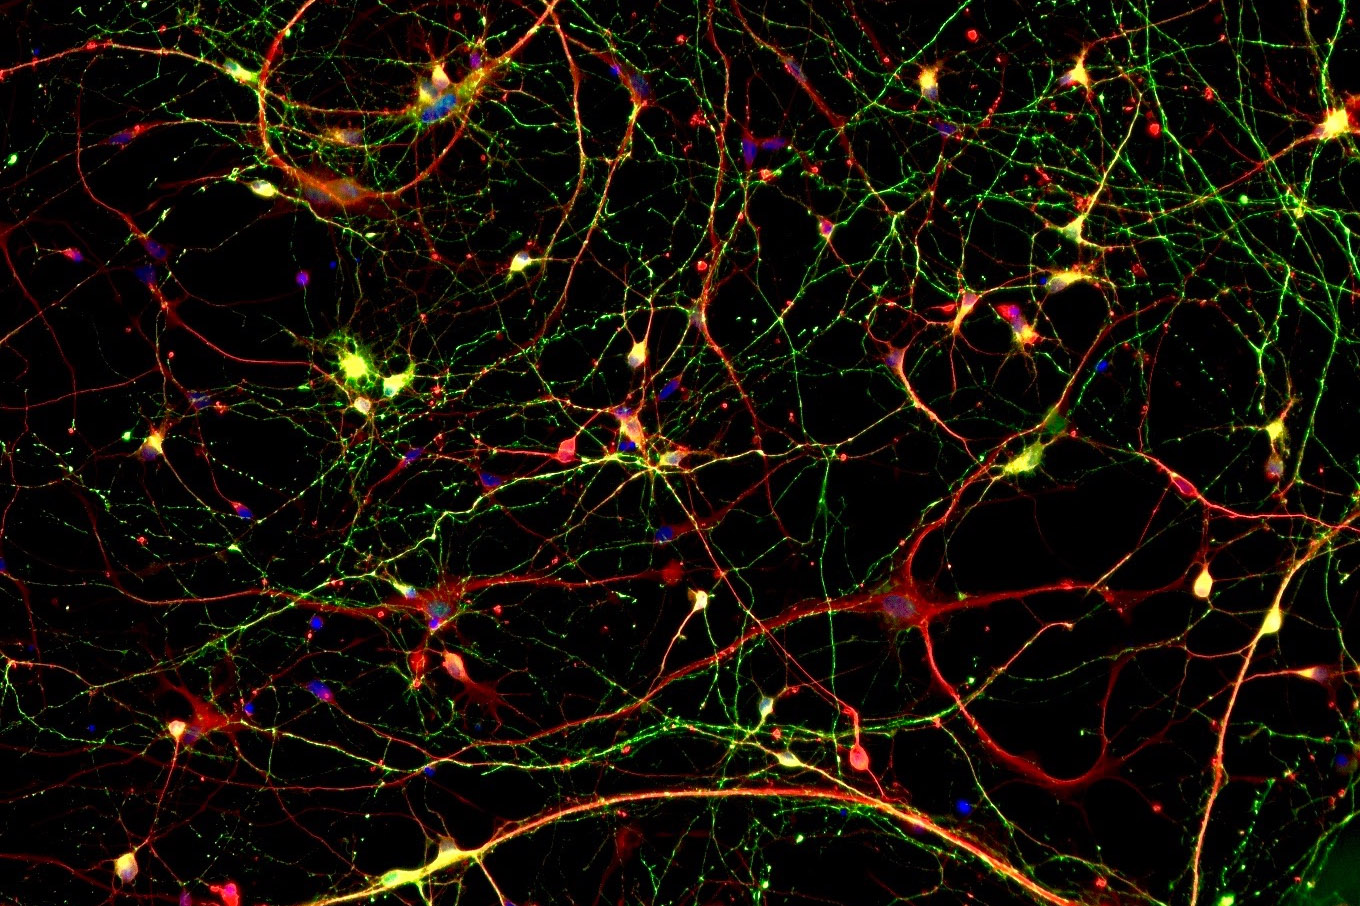 IPSC derived neurons from a patient with Alzheimer's disease